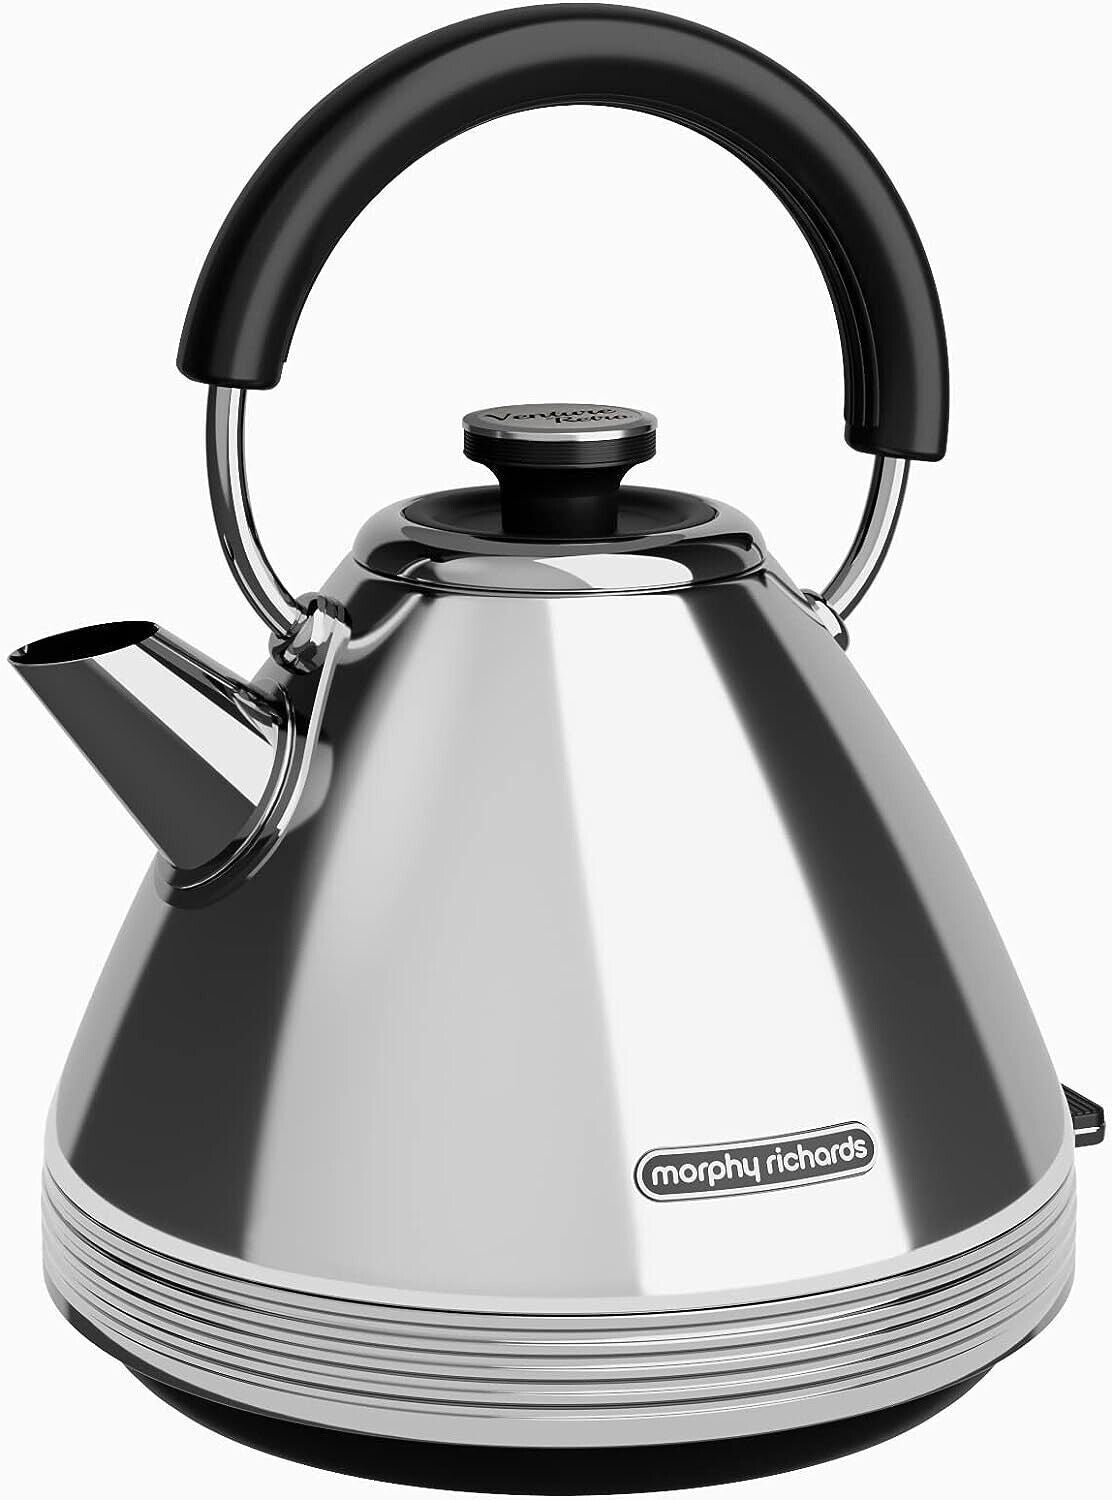 Morphy Richards Venture Retro Style Silver Pyramid Kettle in Polished Steel 100330